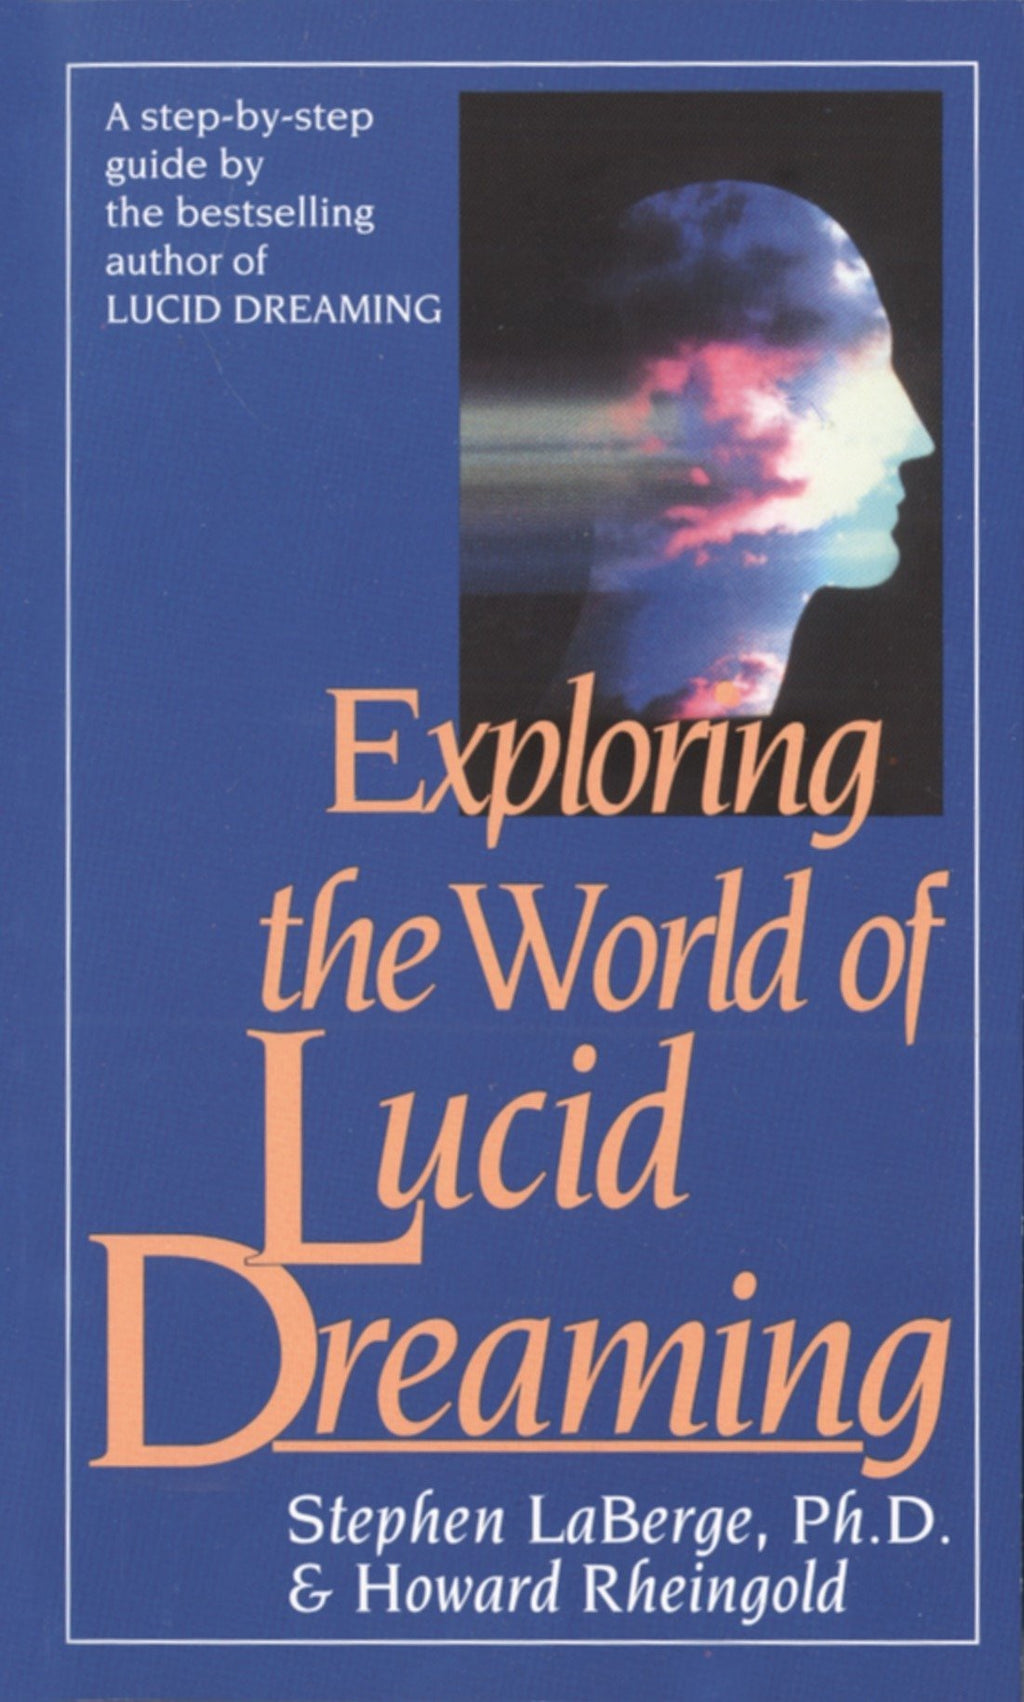 Exploring the world of lucid dreaming: 9780345374103